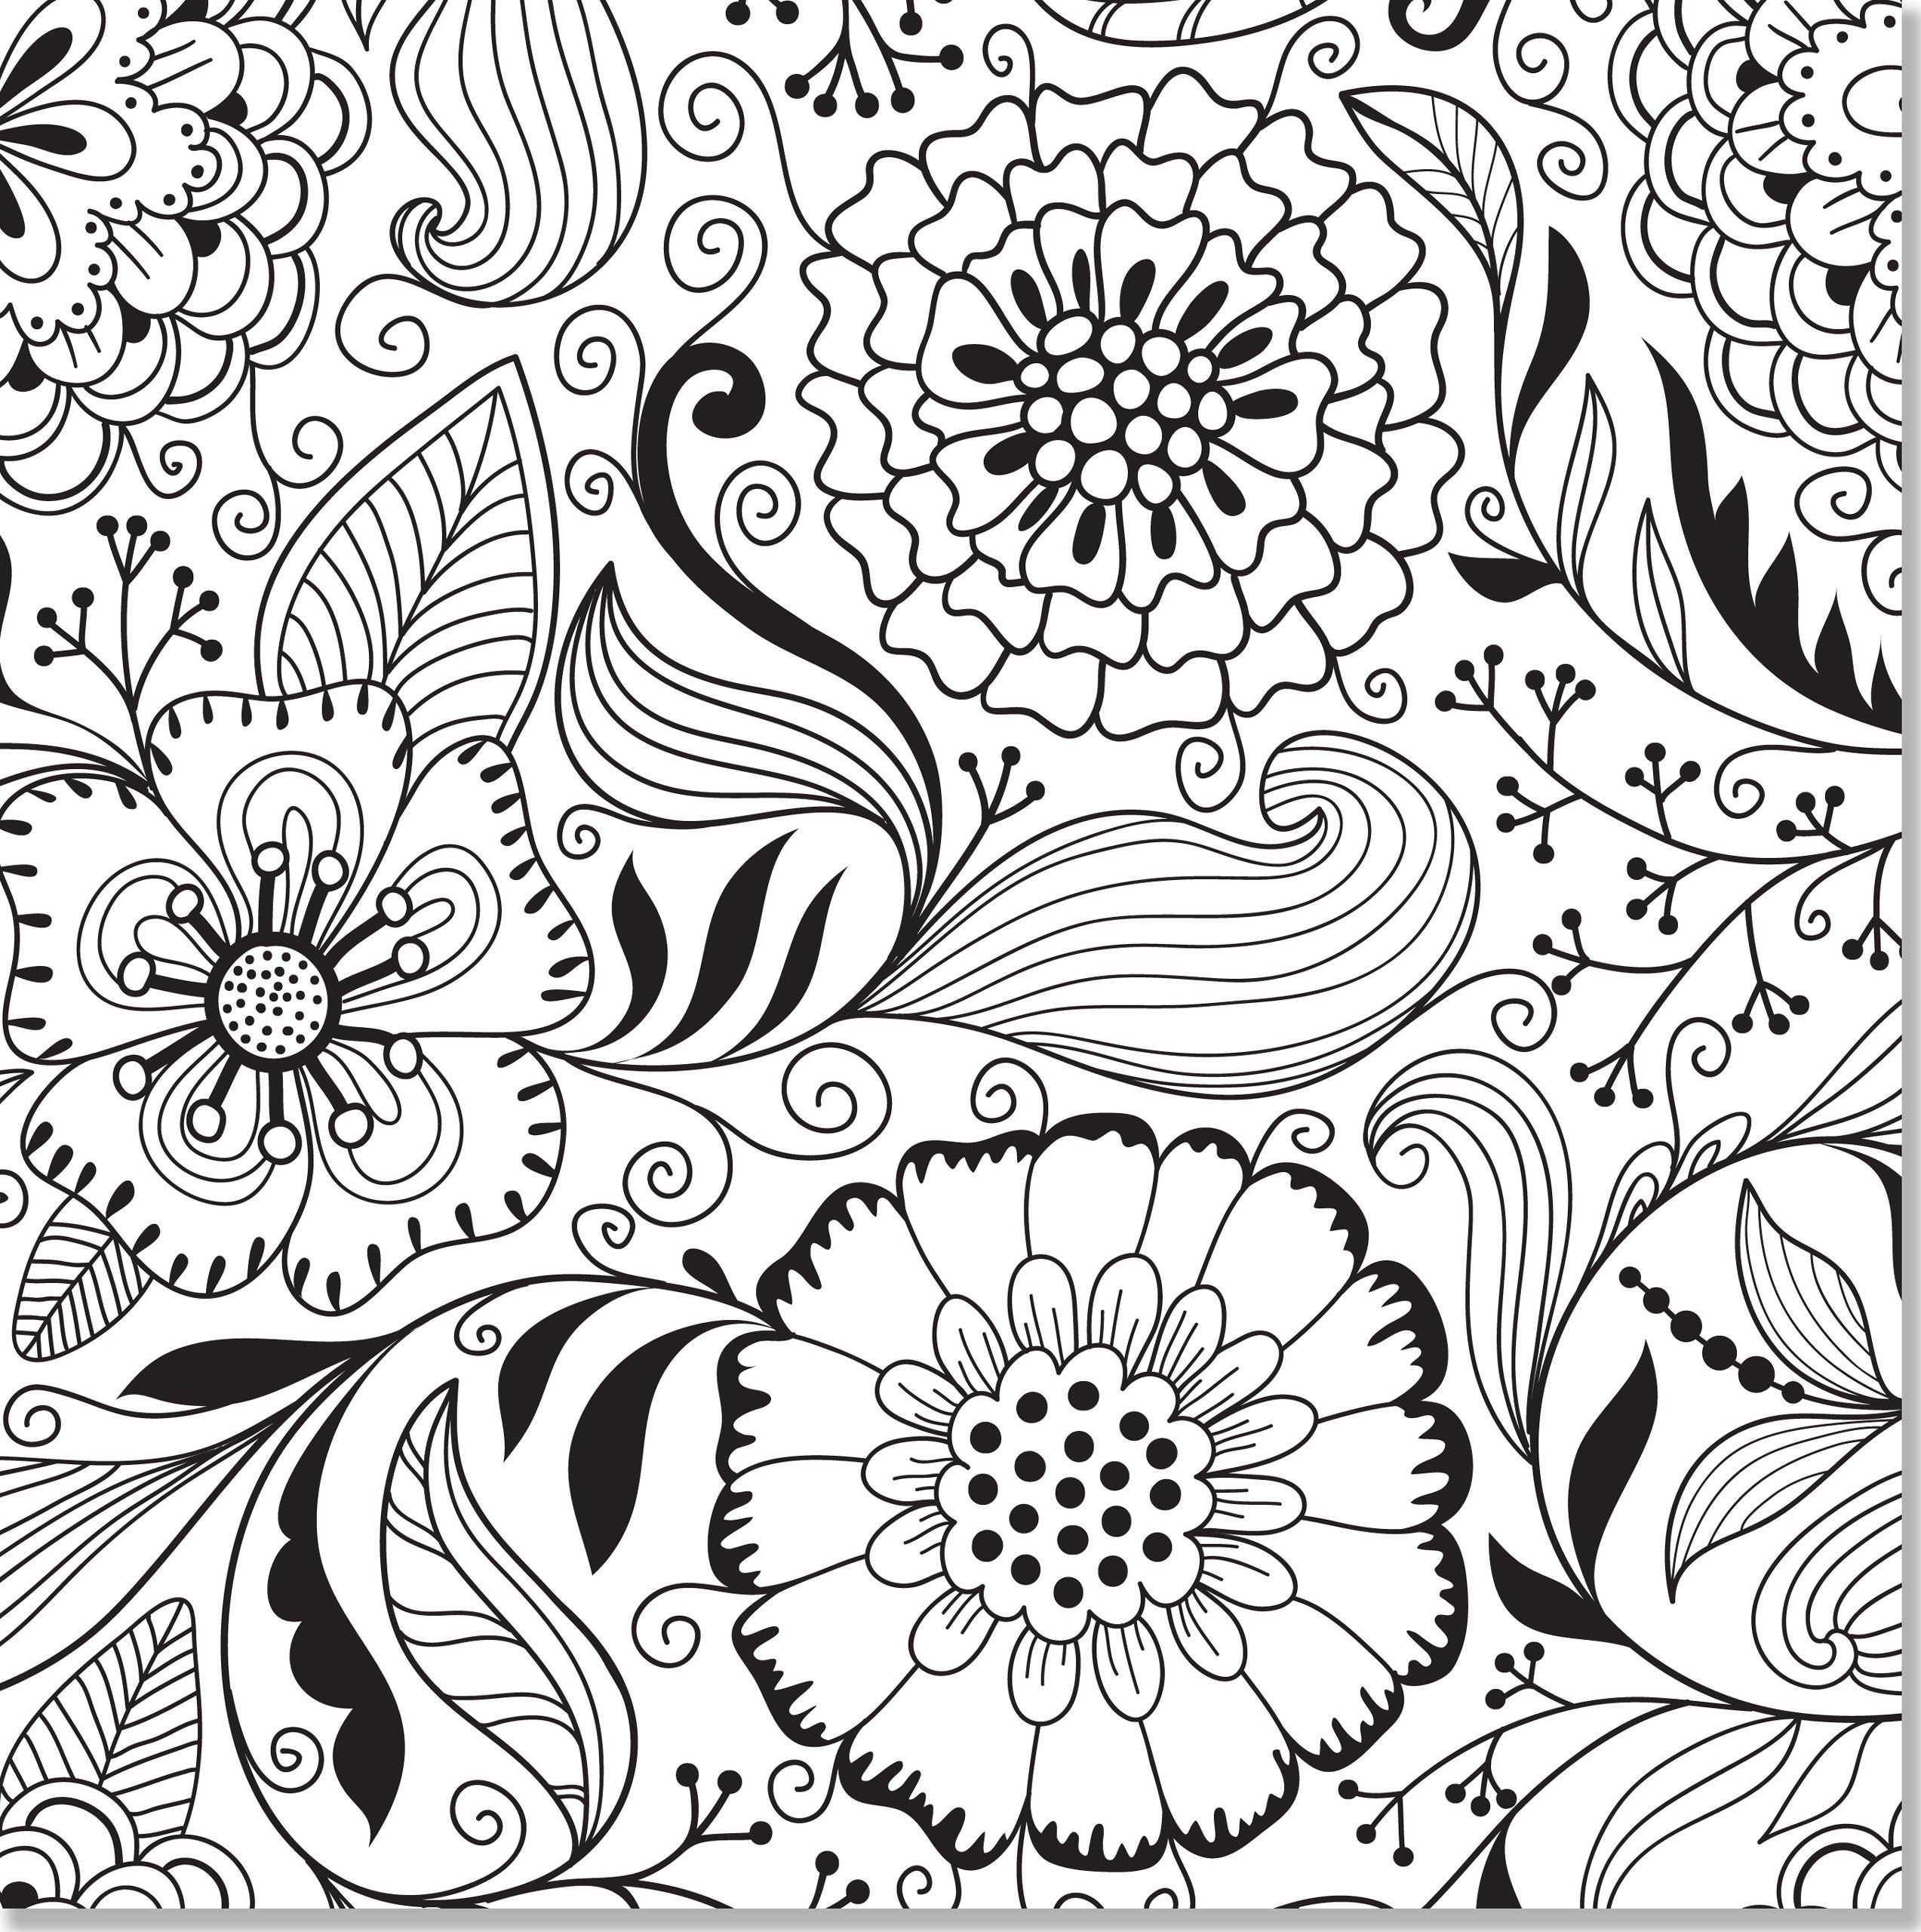 Abstract Designs coloring pages jetis.